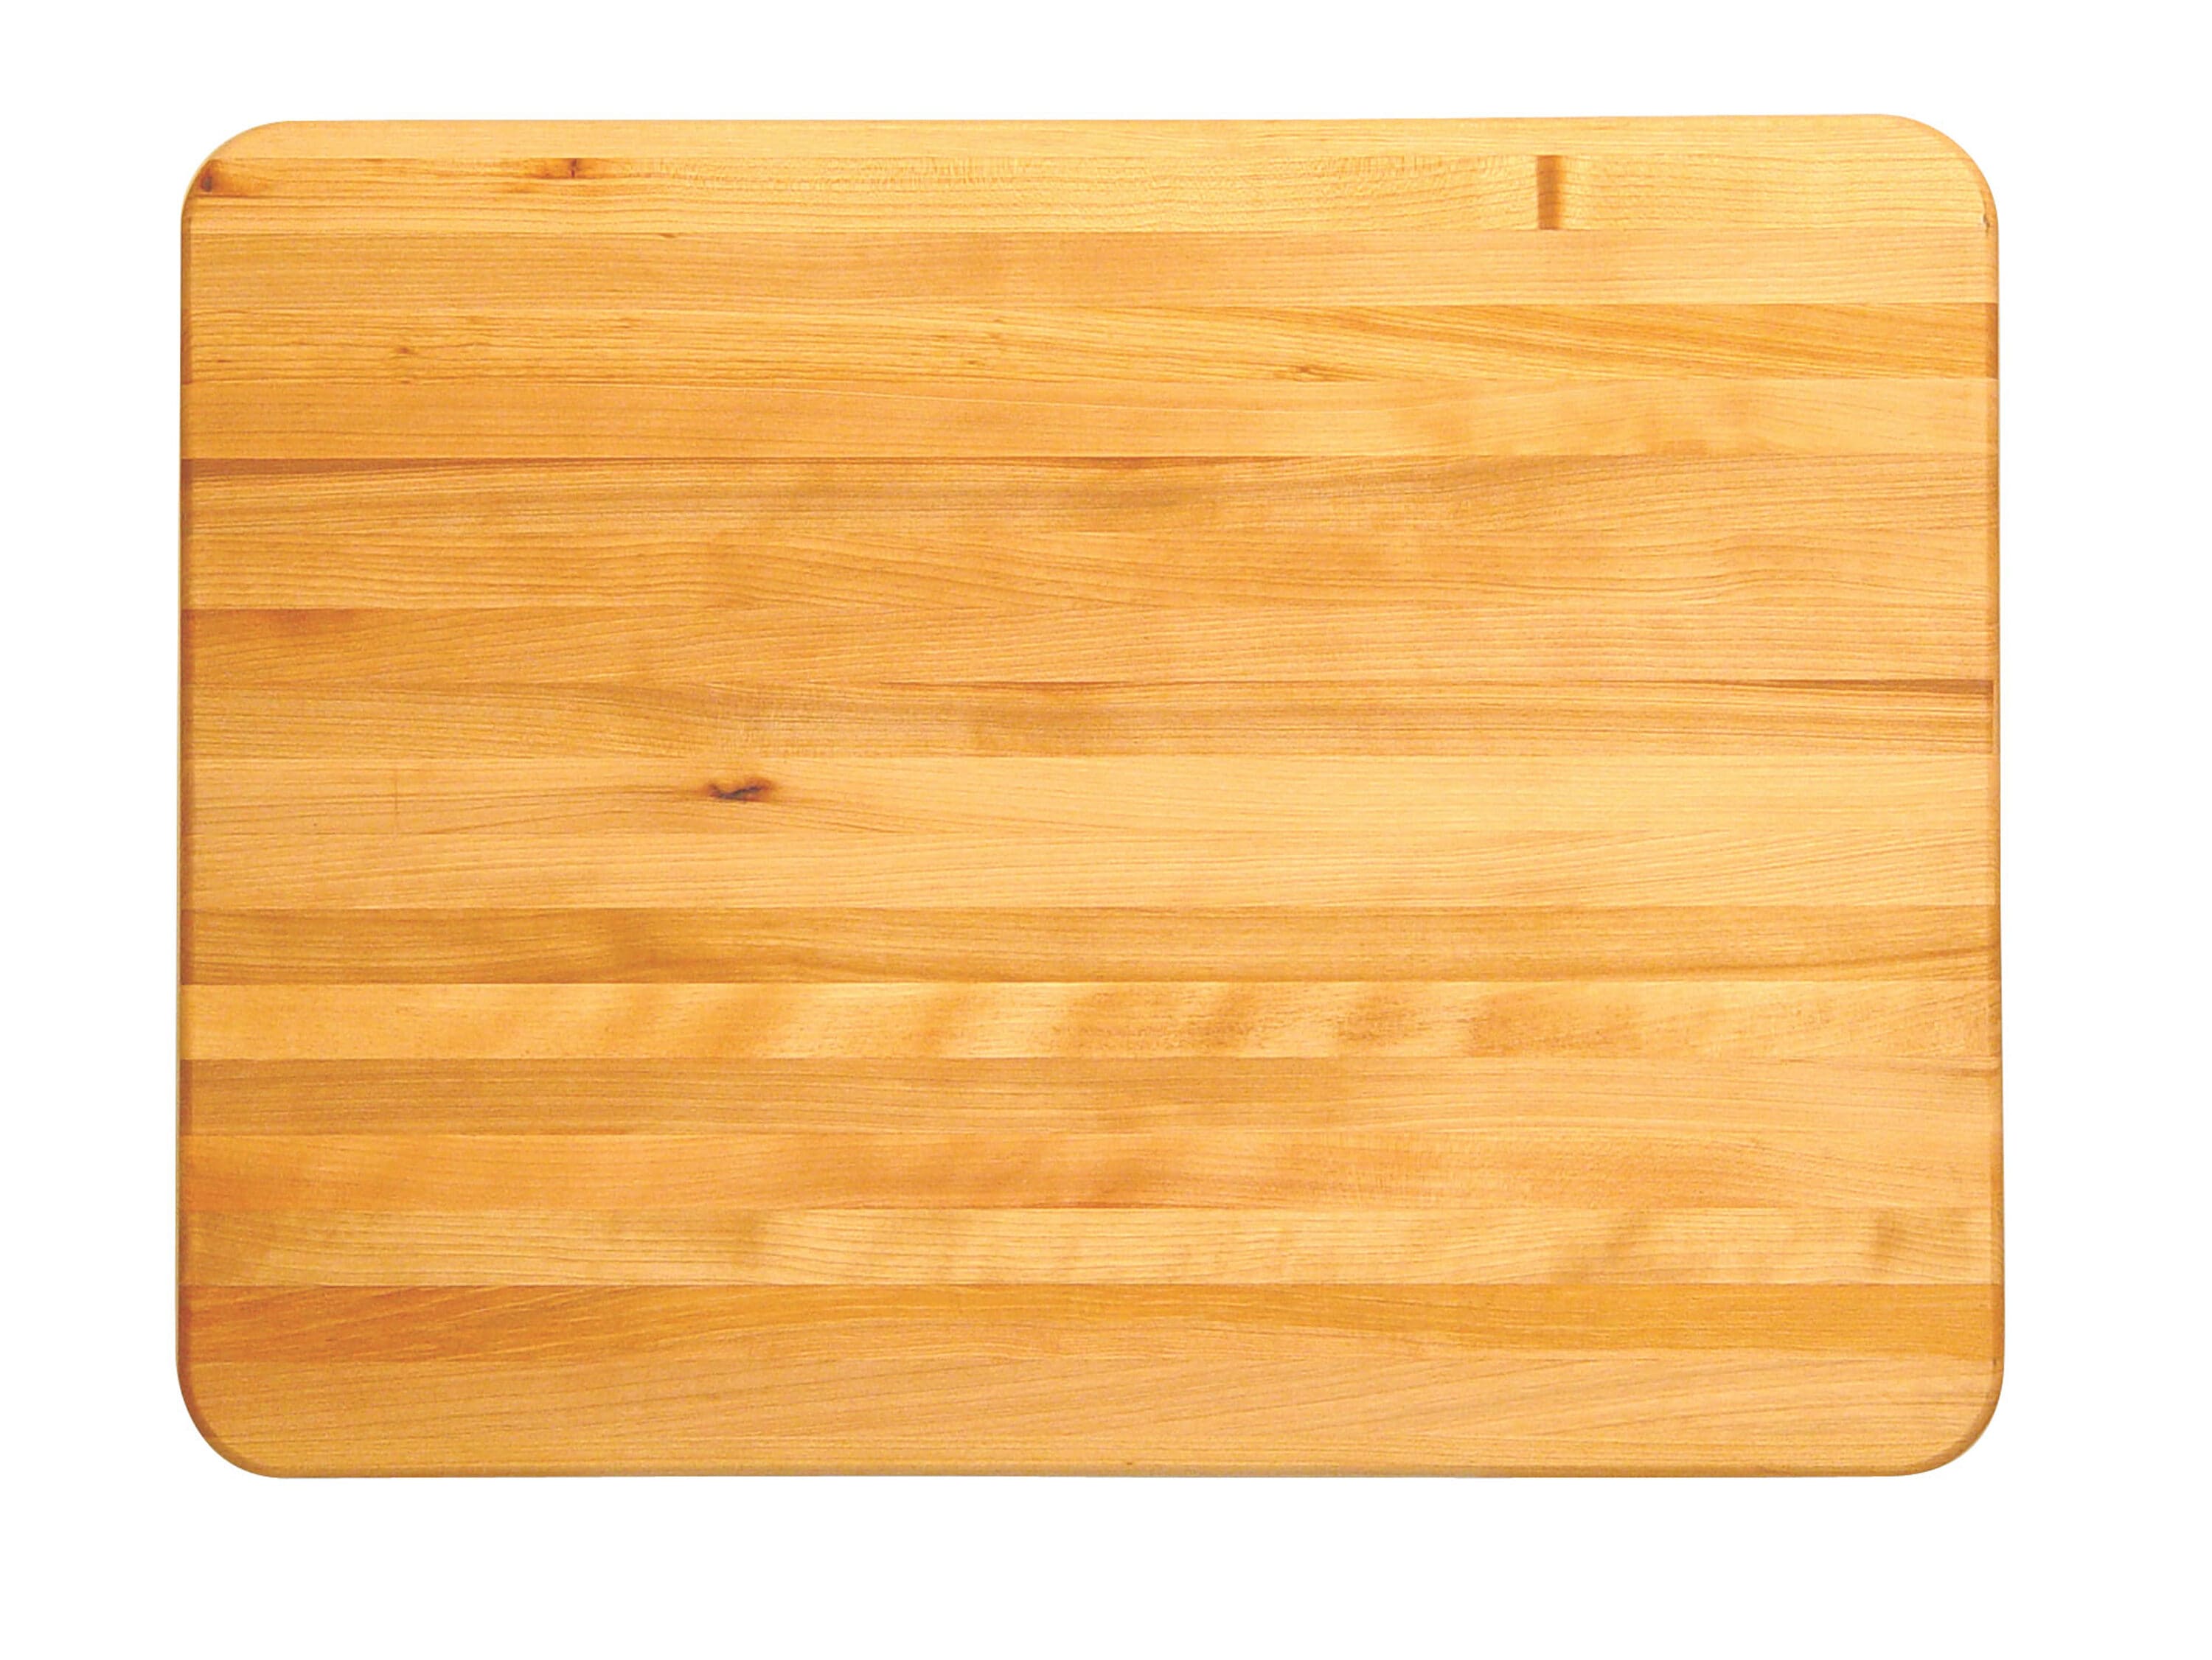 African Mahogany Cutting Board Wooden Stove Top Cover Box Style